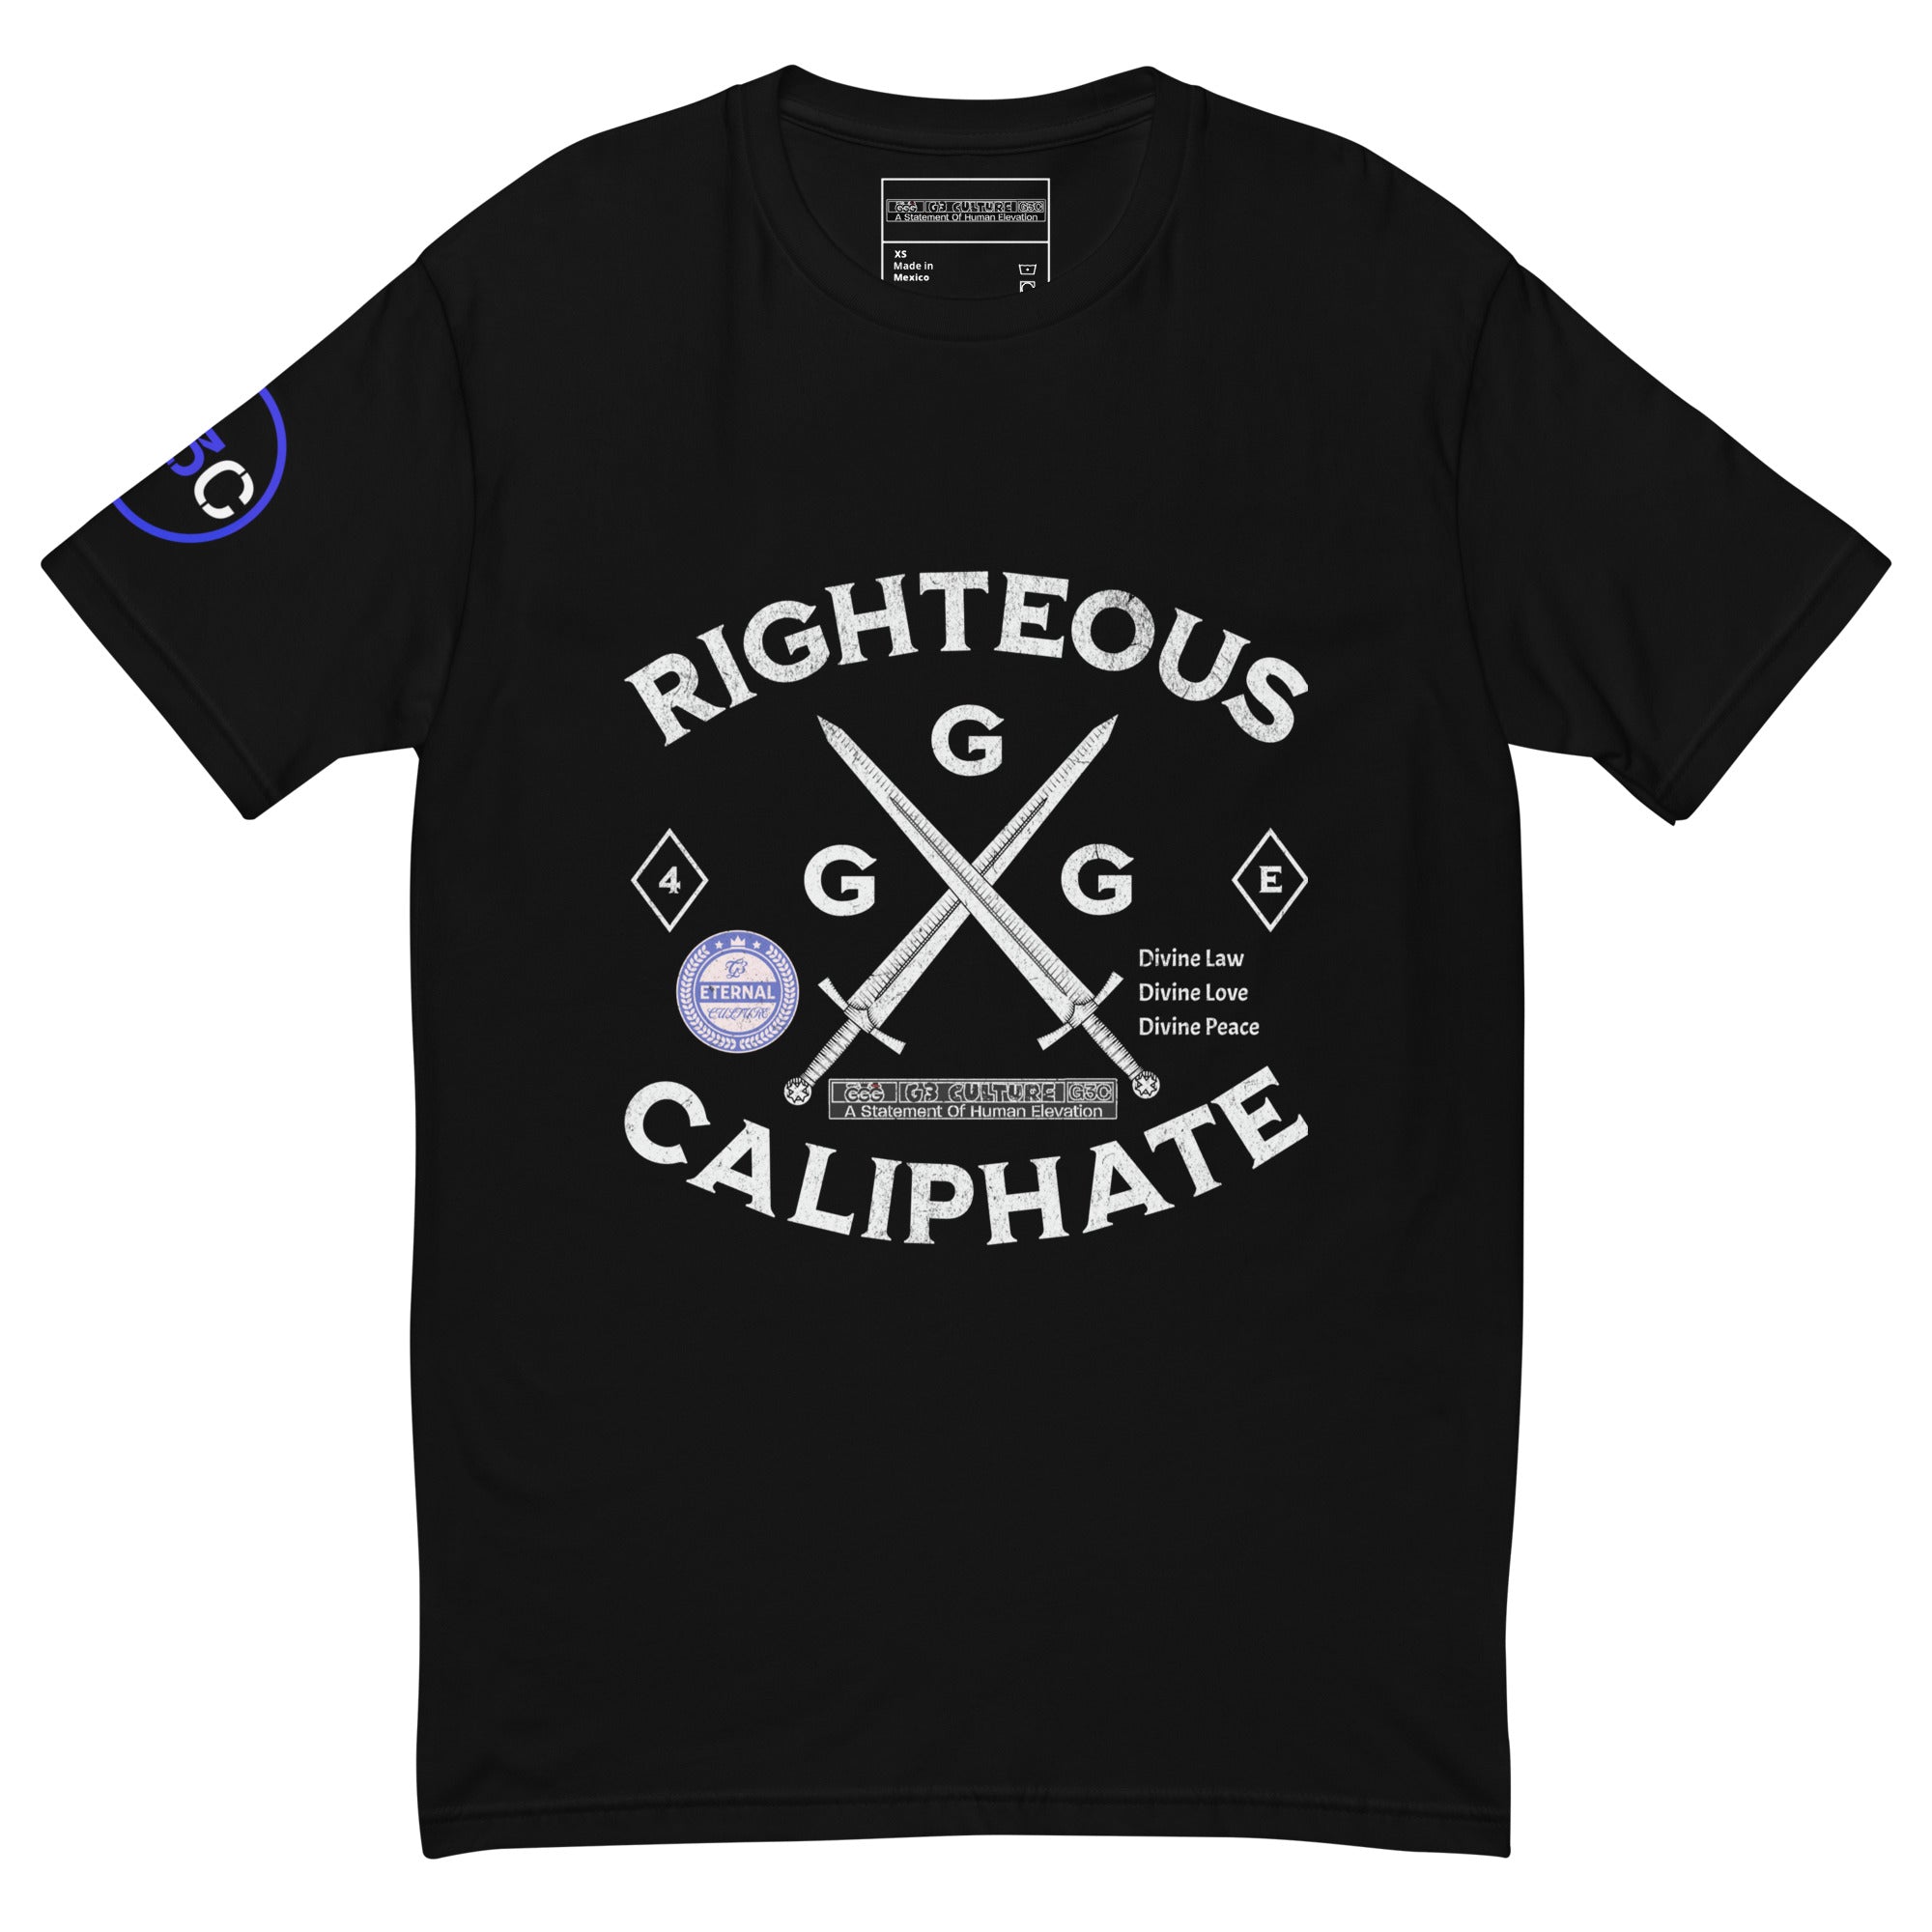 Righteous Caliphate